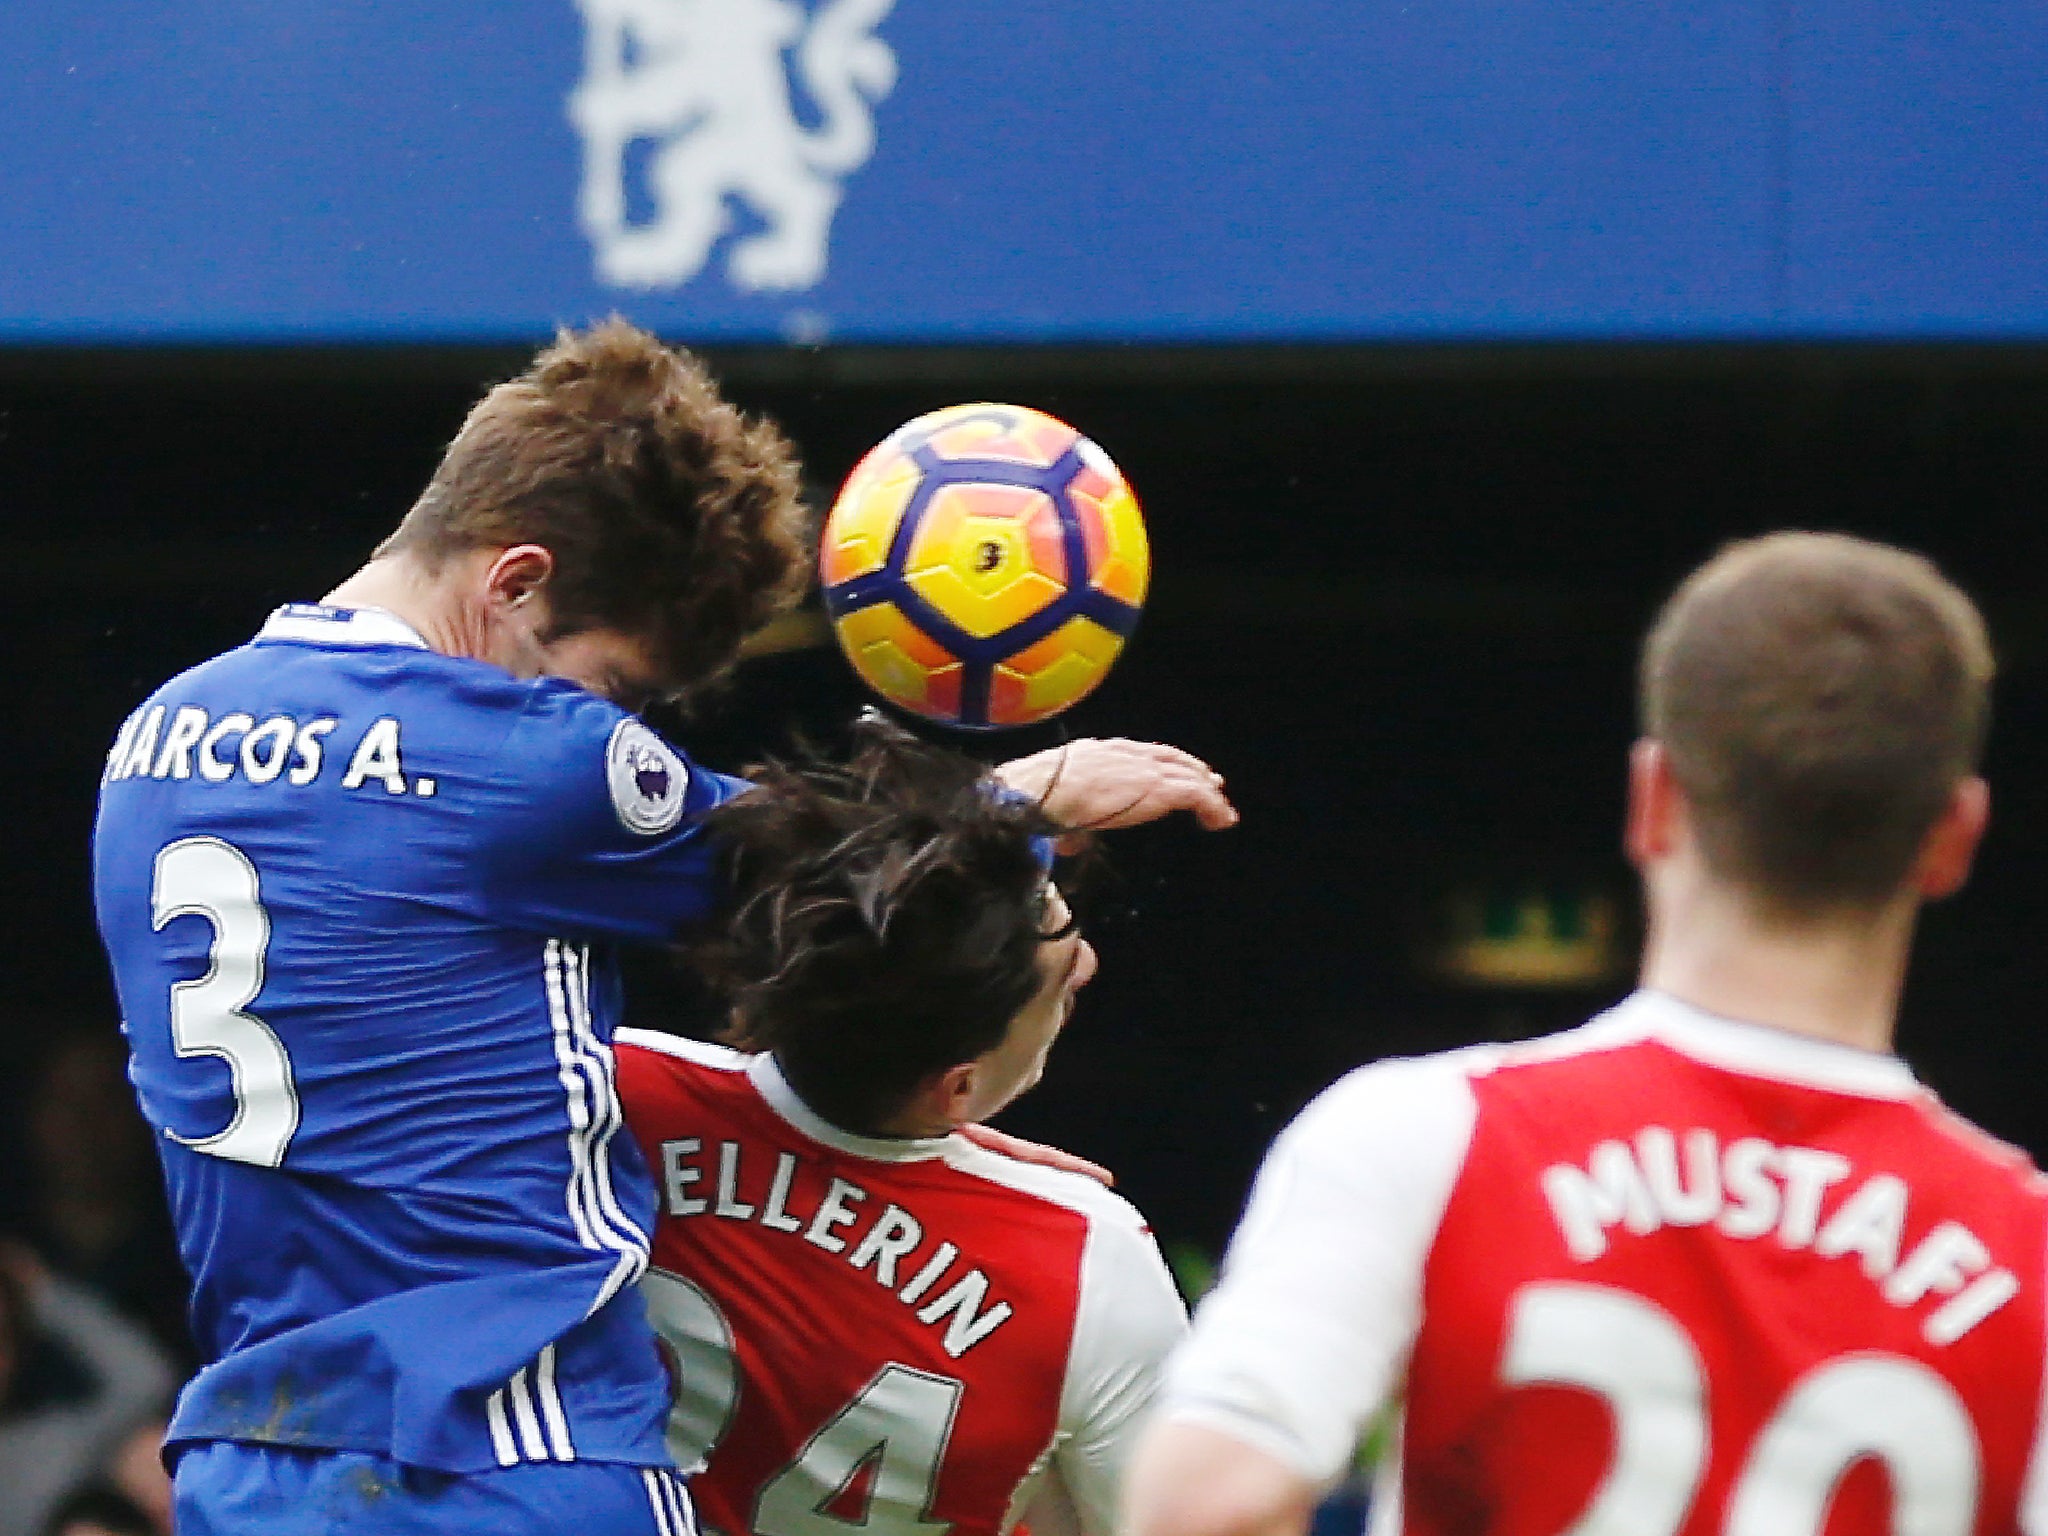 Bellerin and Alonso clashed for Chelsea's opening goal